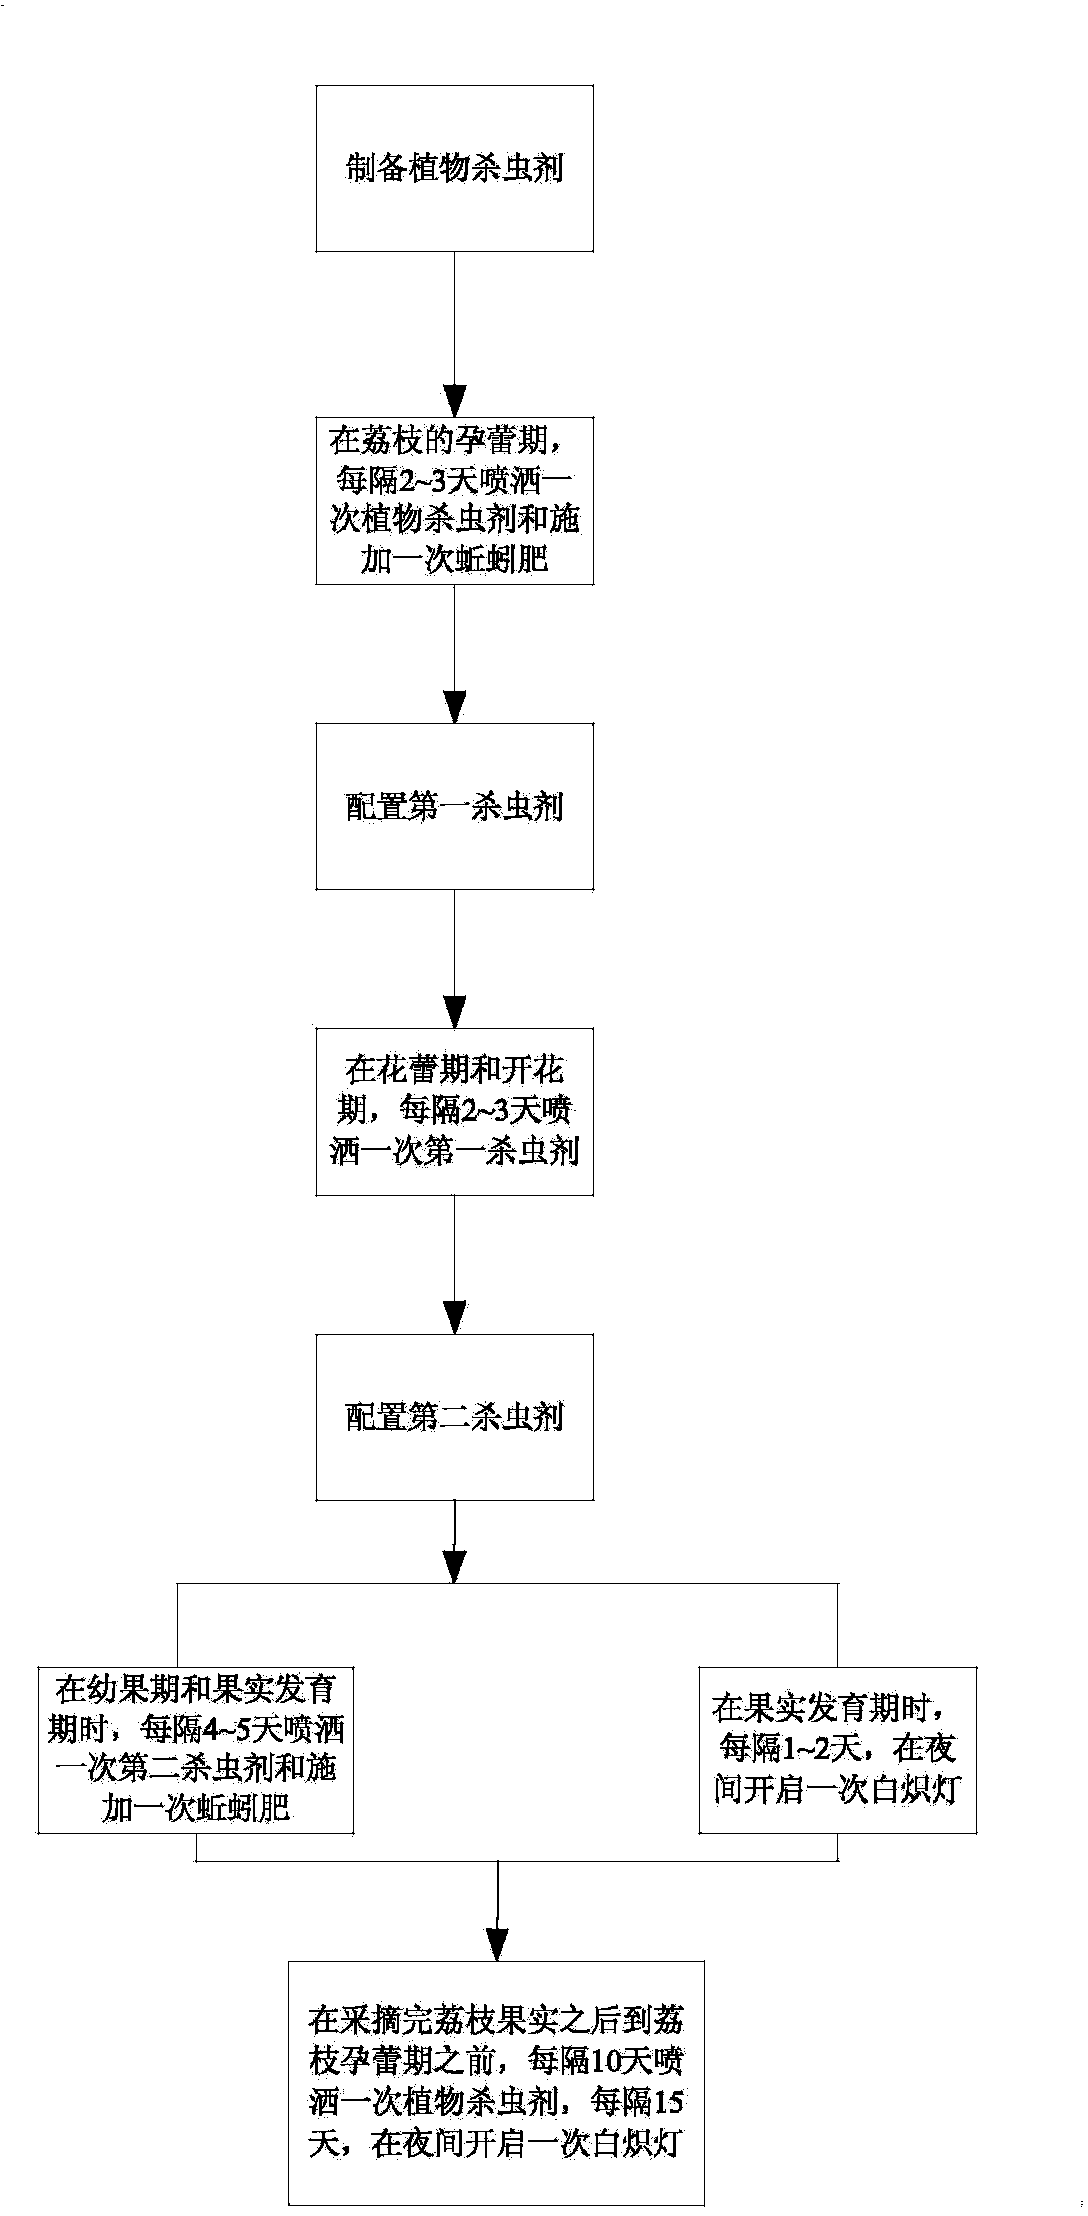 Method for preventing and treating litchi diseases and pests through botanical insecticide